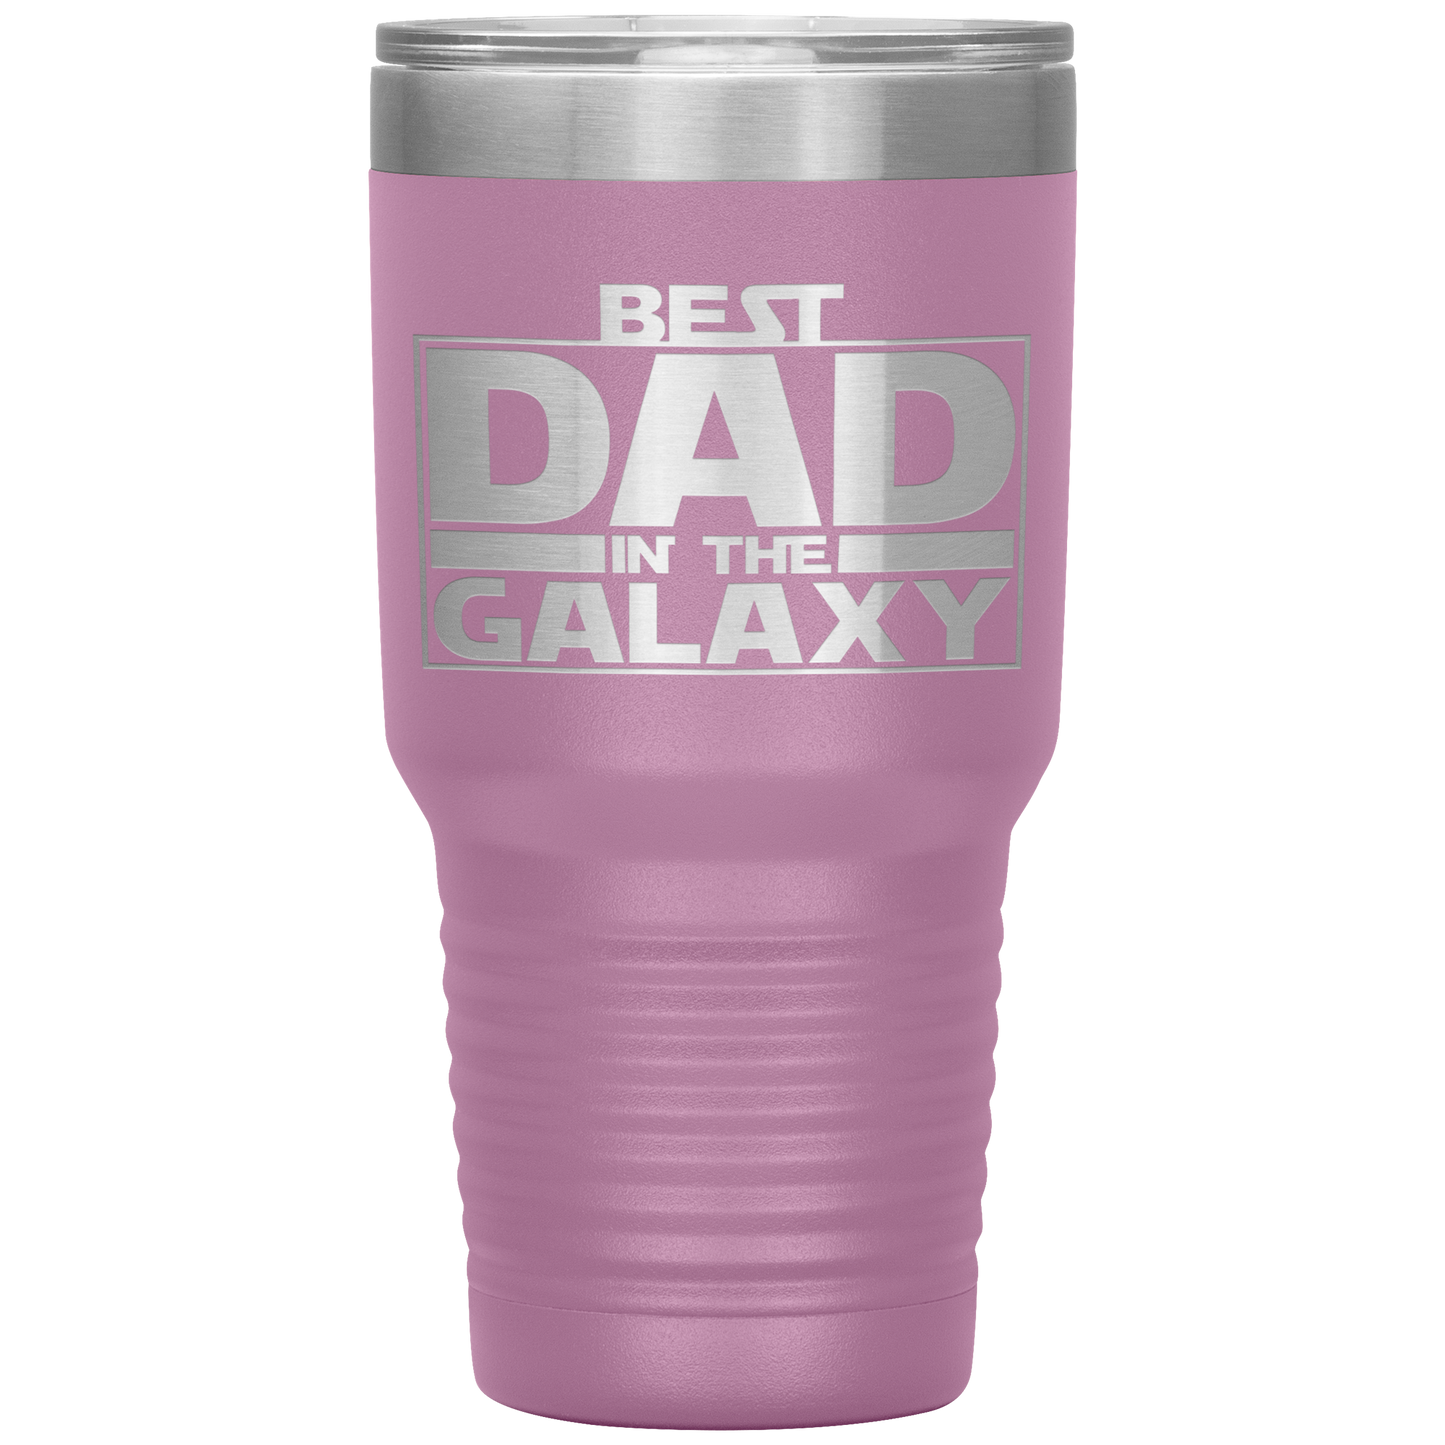 Best Dad in the Galaxy Tumbler For Dad Father's day Gift Funny Tumbler Gift